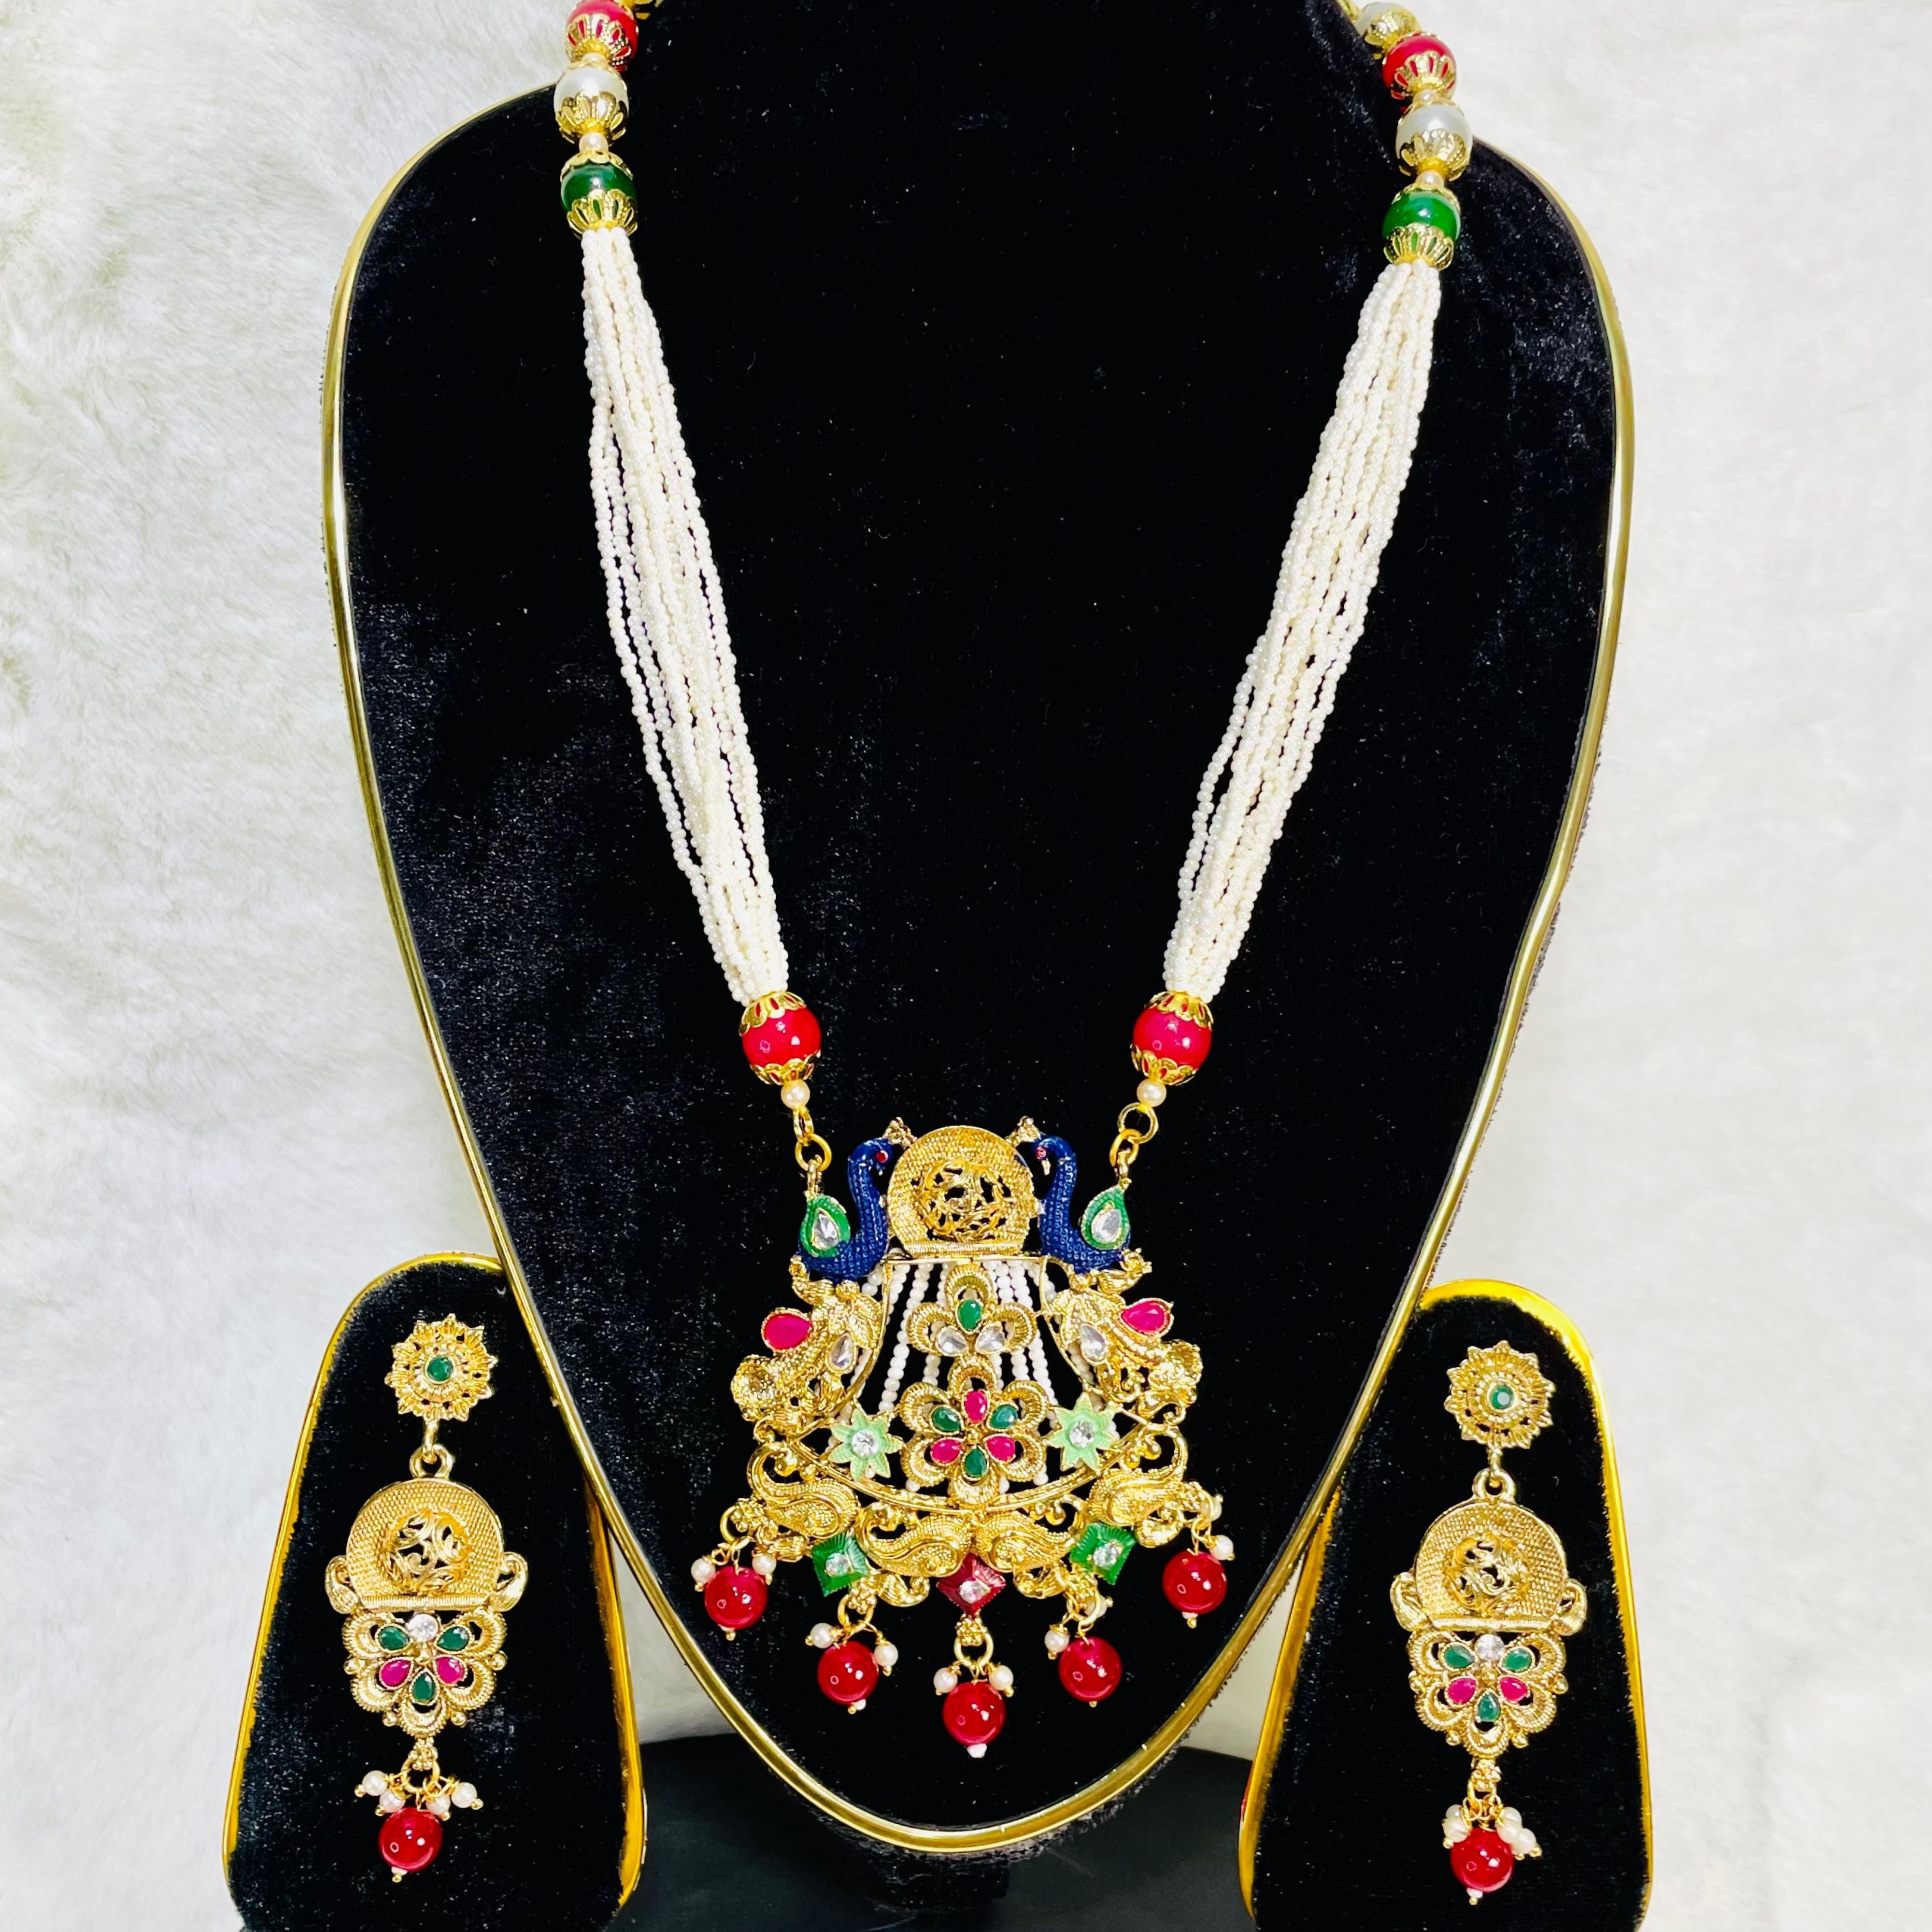 Indian Gold Plated Pearl Rani Haar Necklace Earrings Set